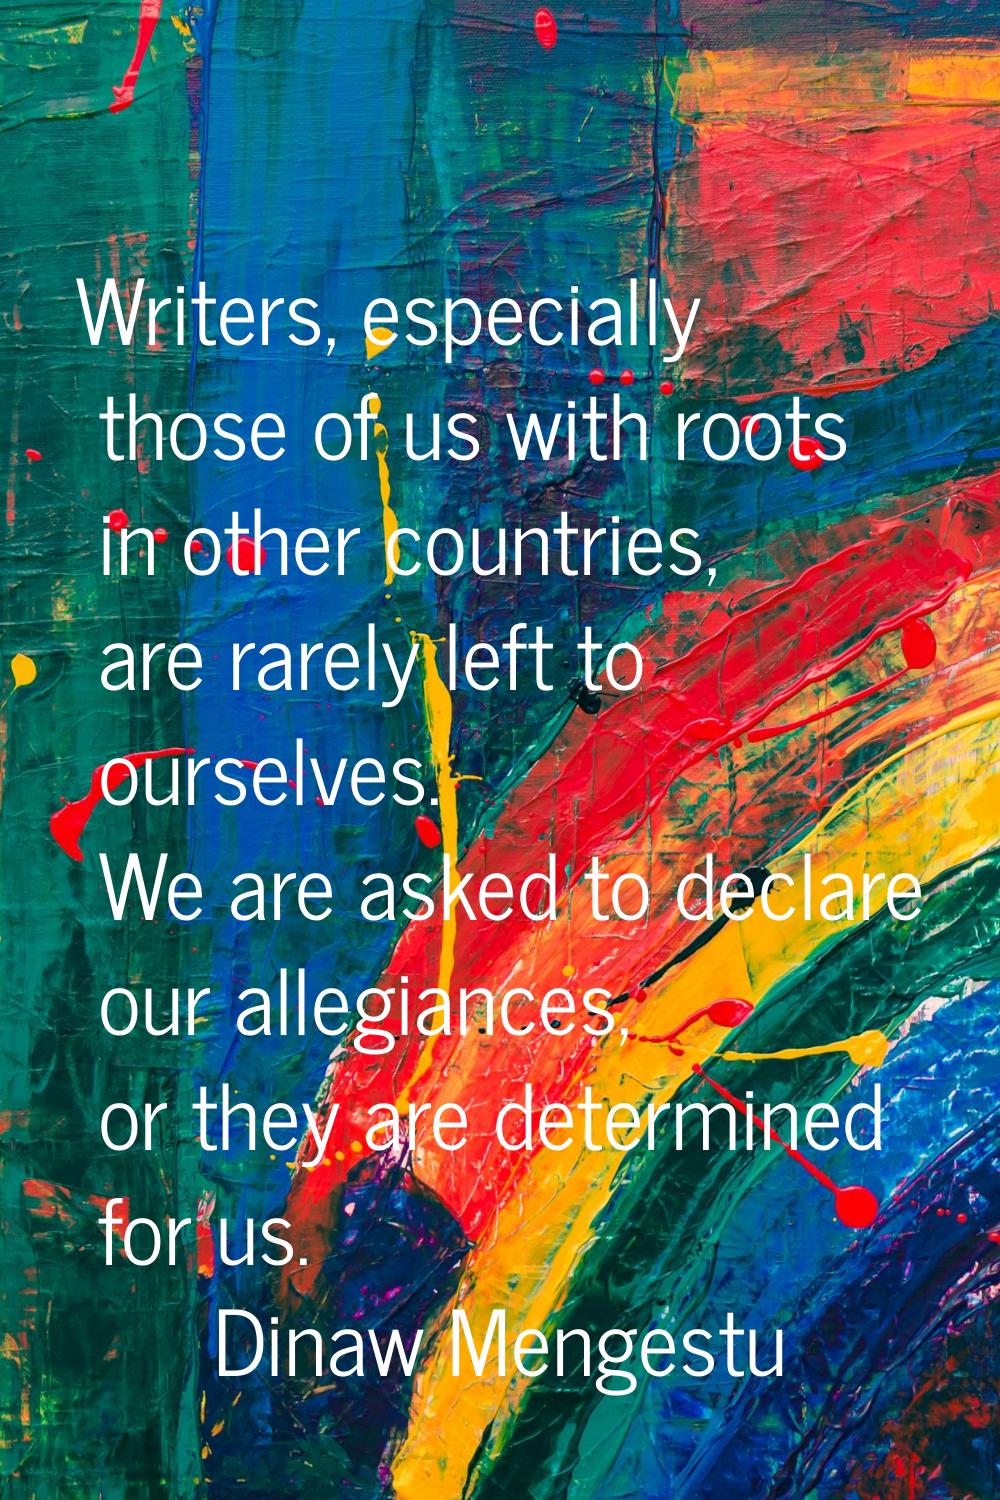 Writers, especially those of us with roots in other countries, are rarely left to ourselves. We are